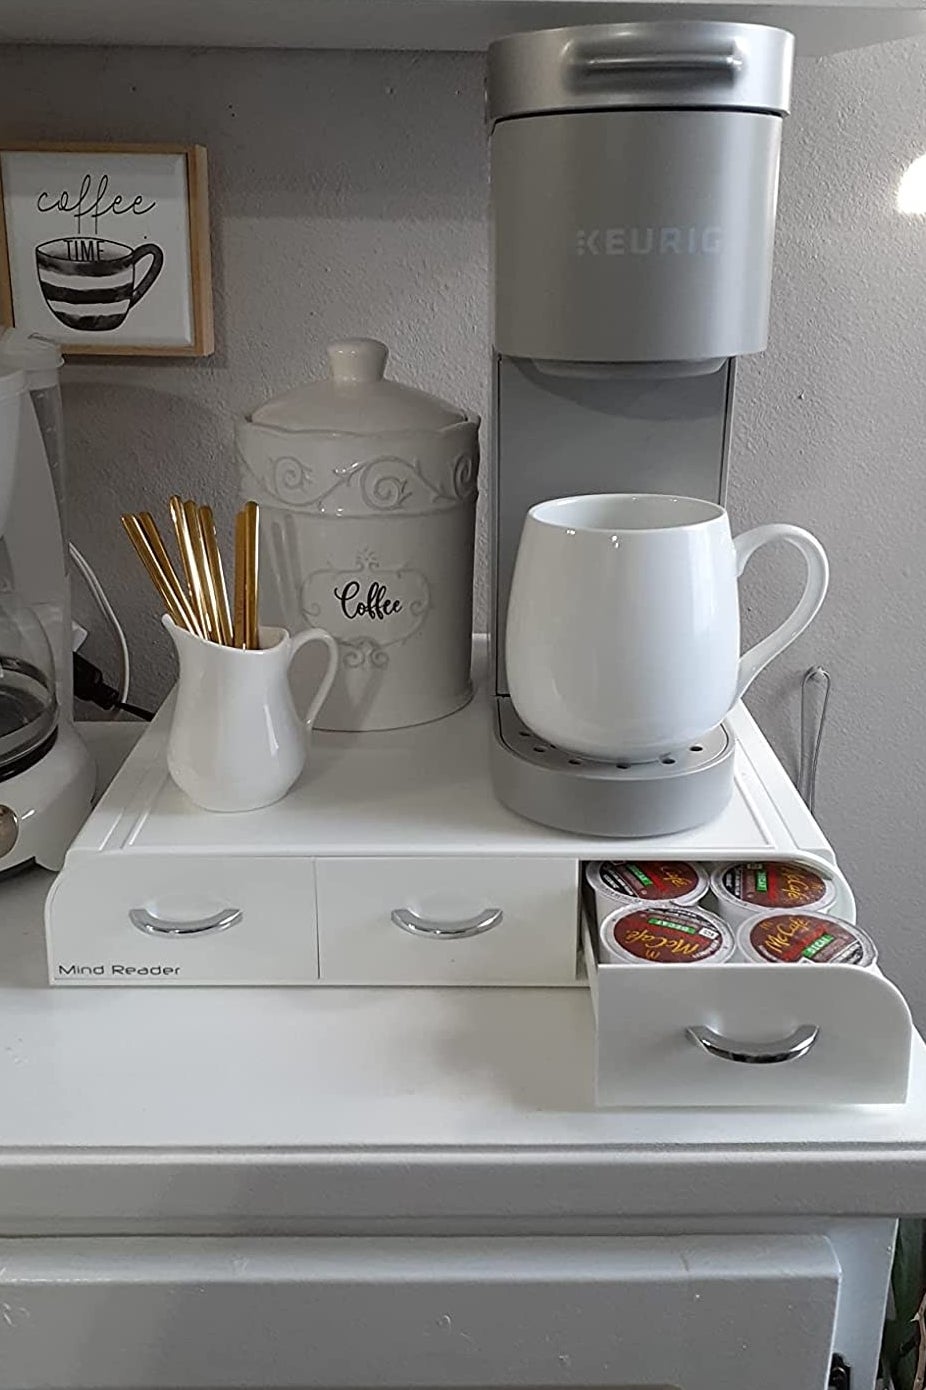 Clutter-Free Classroom - A ☕ Keurig K-cup storage container is a great  storage solution for organizing play dough. Such a cool idea! 👍👍 This  image was posted on Instagram by failingforwardbooks 